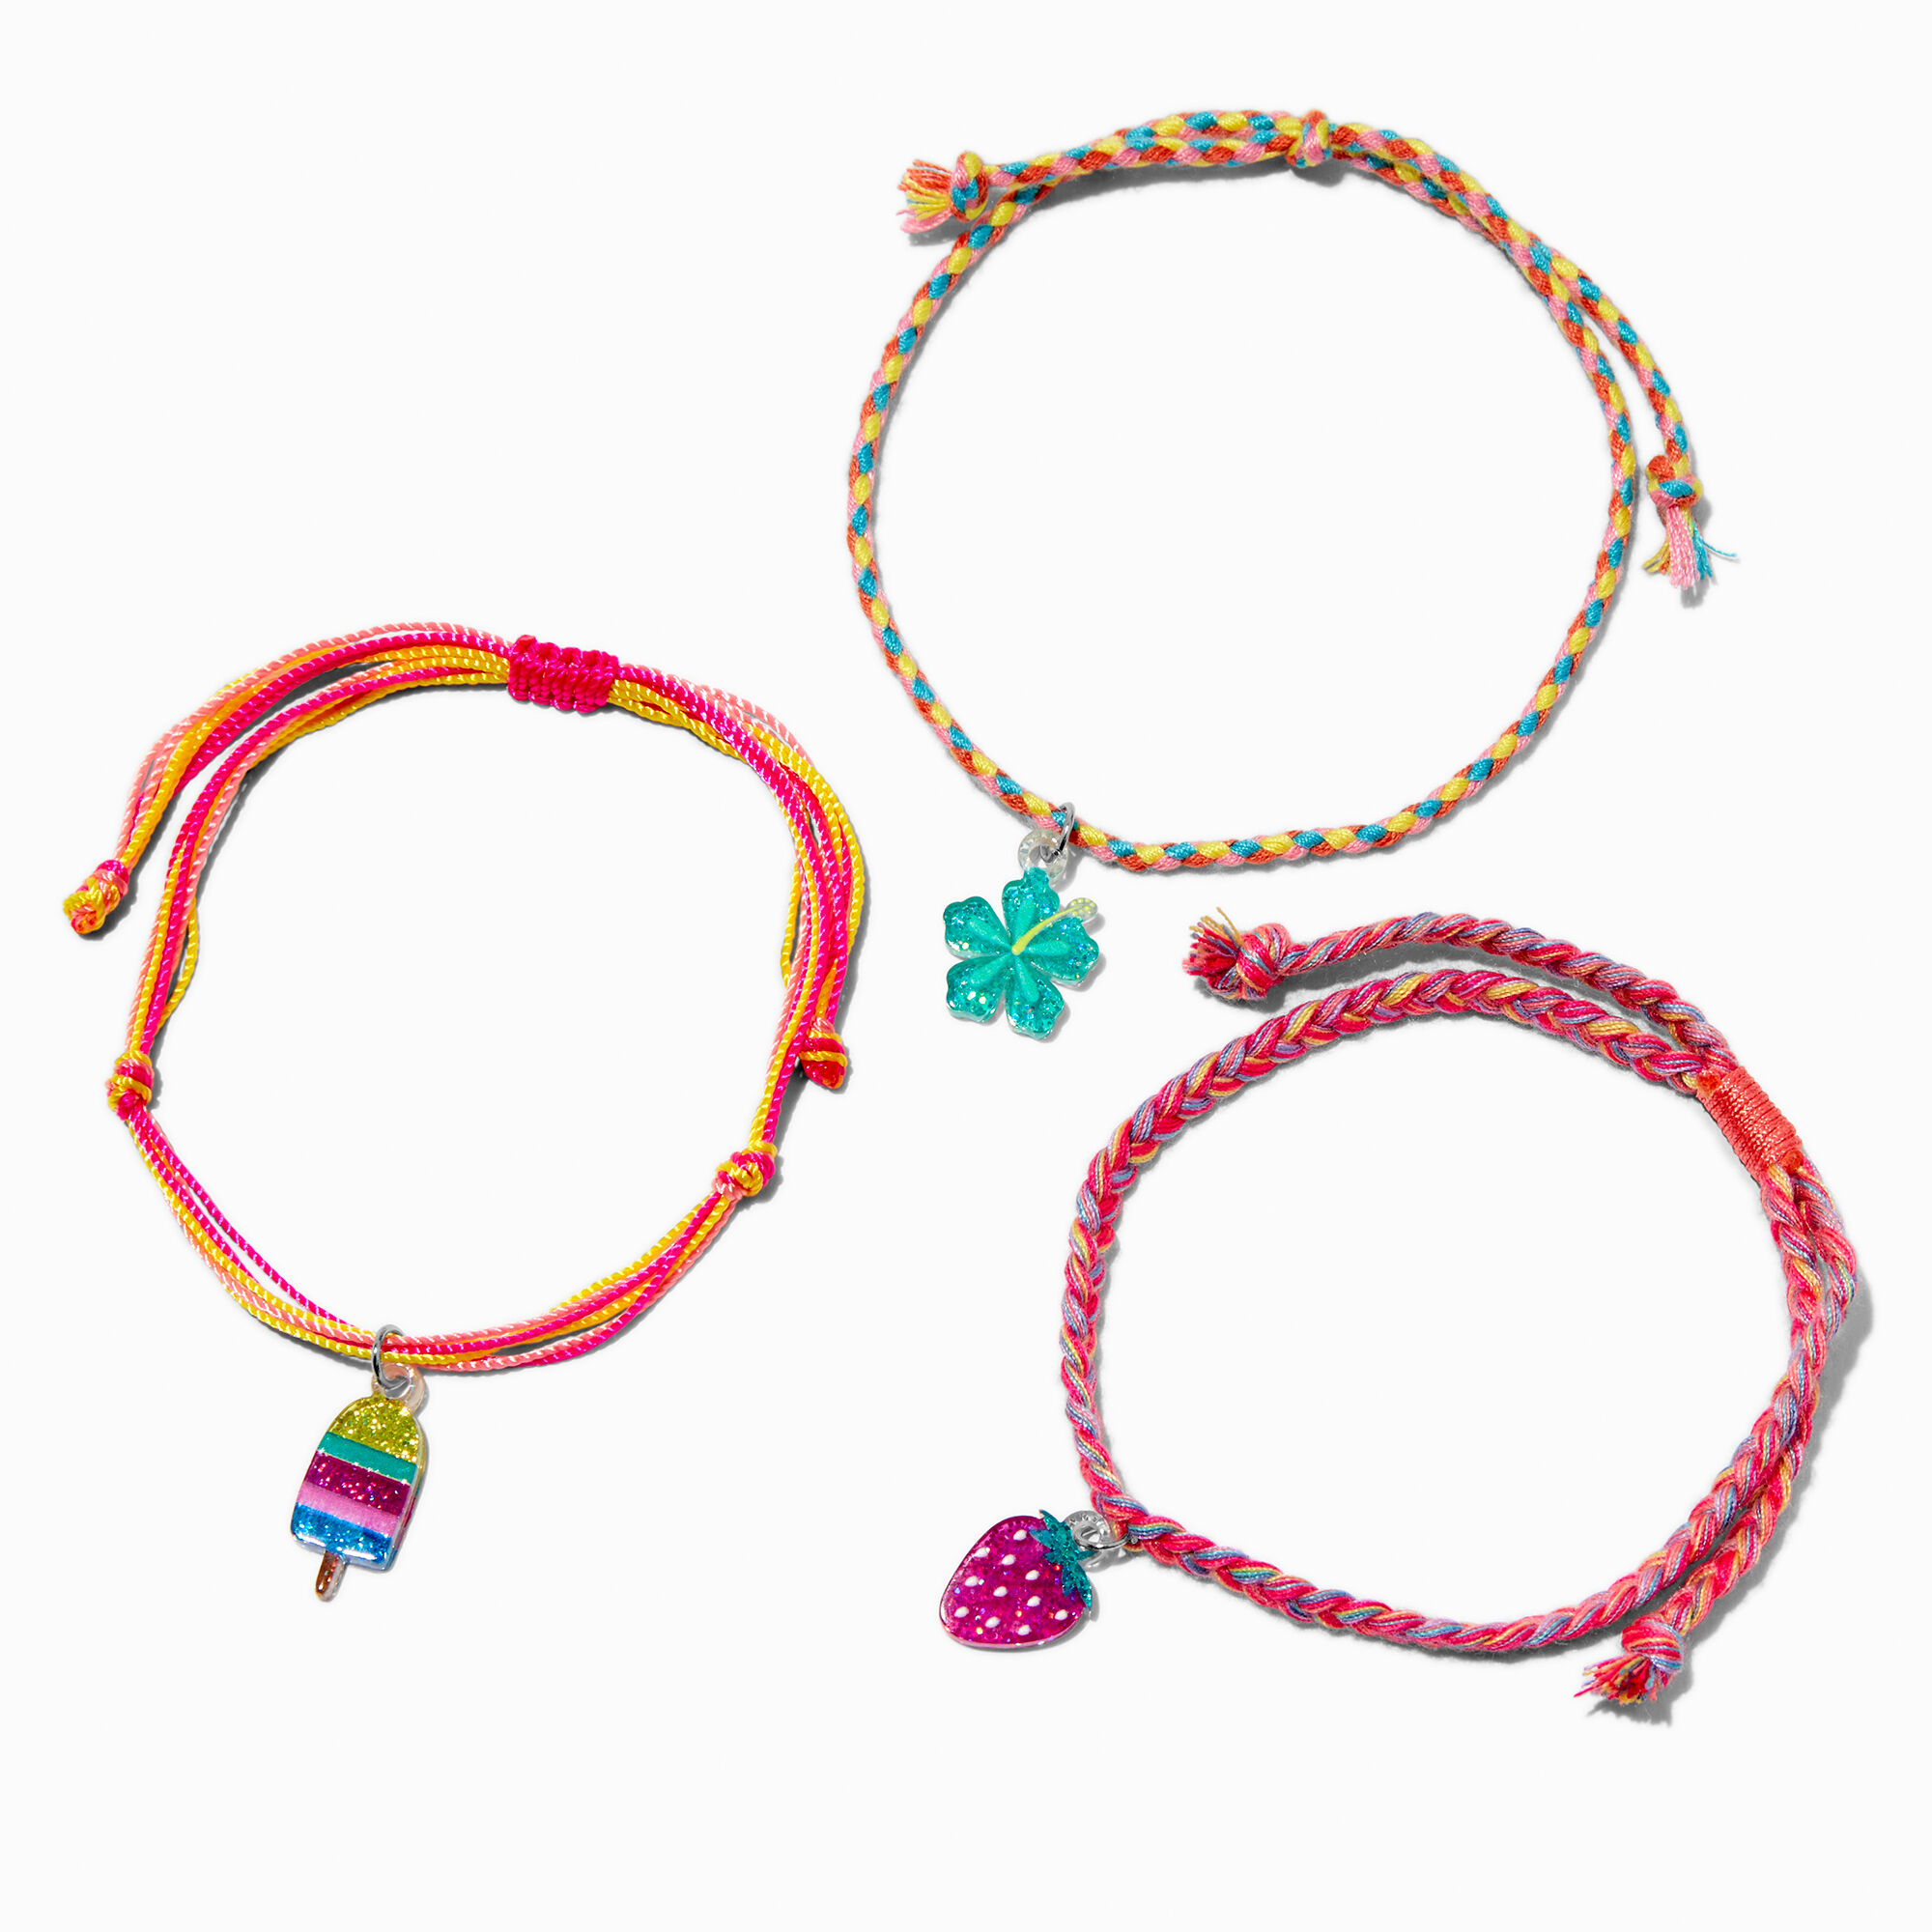 View Claires Club Summer Braided Anklets 3 Pack information